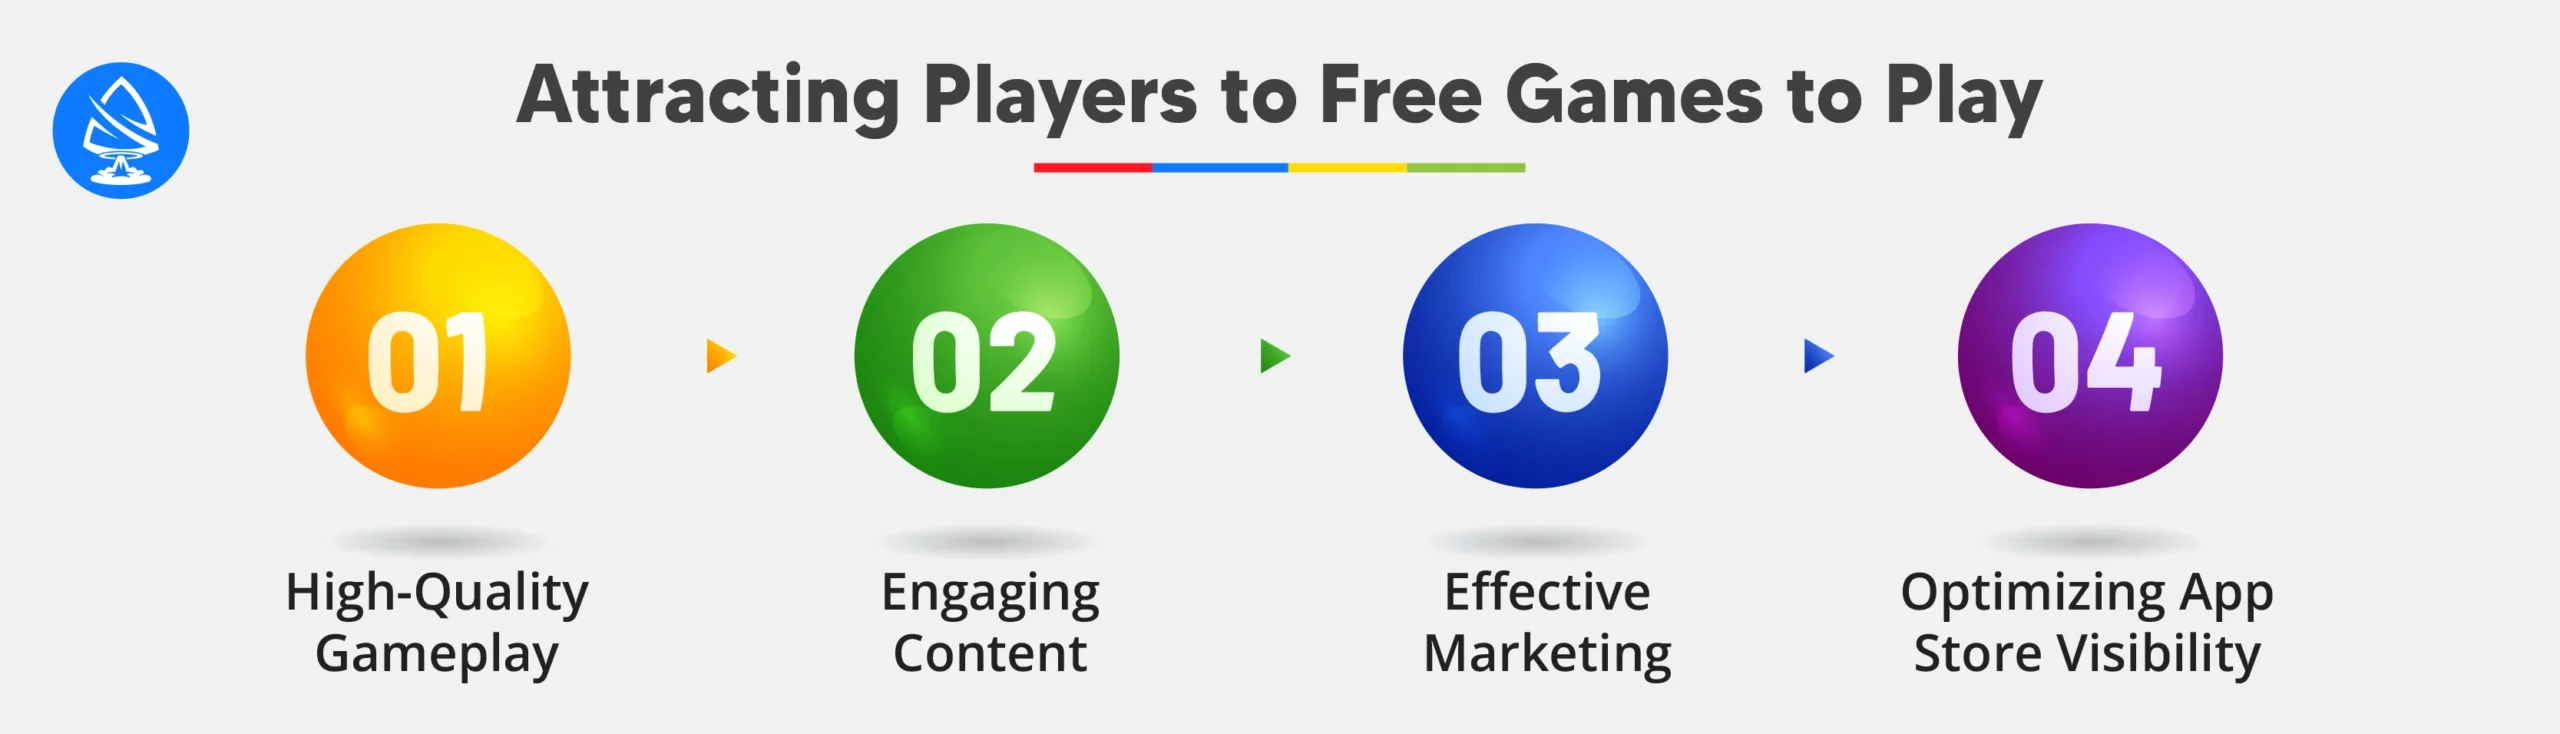 Attracting Players to Free Games to Play - Make money